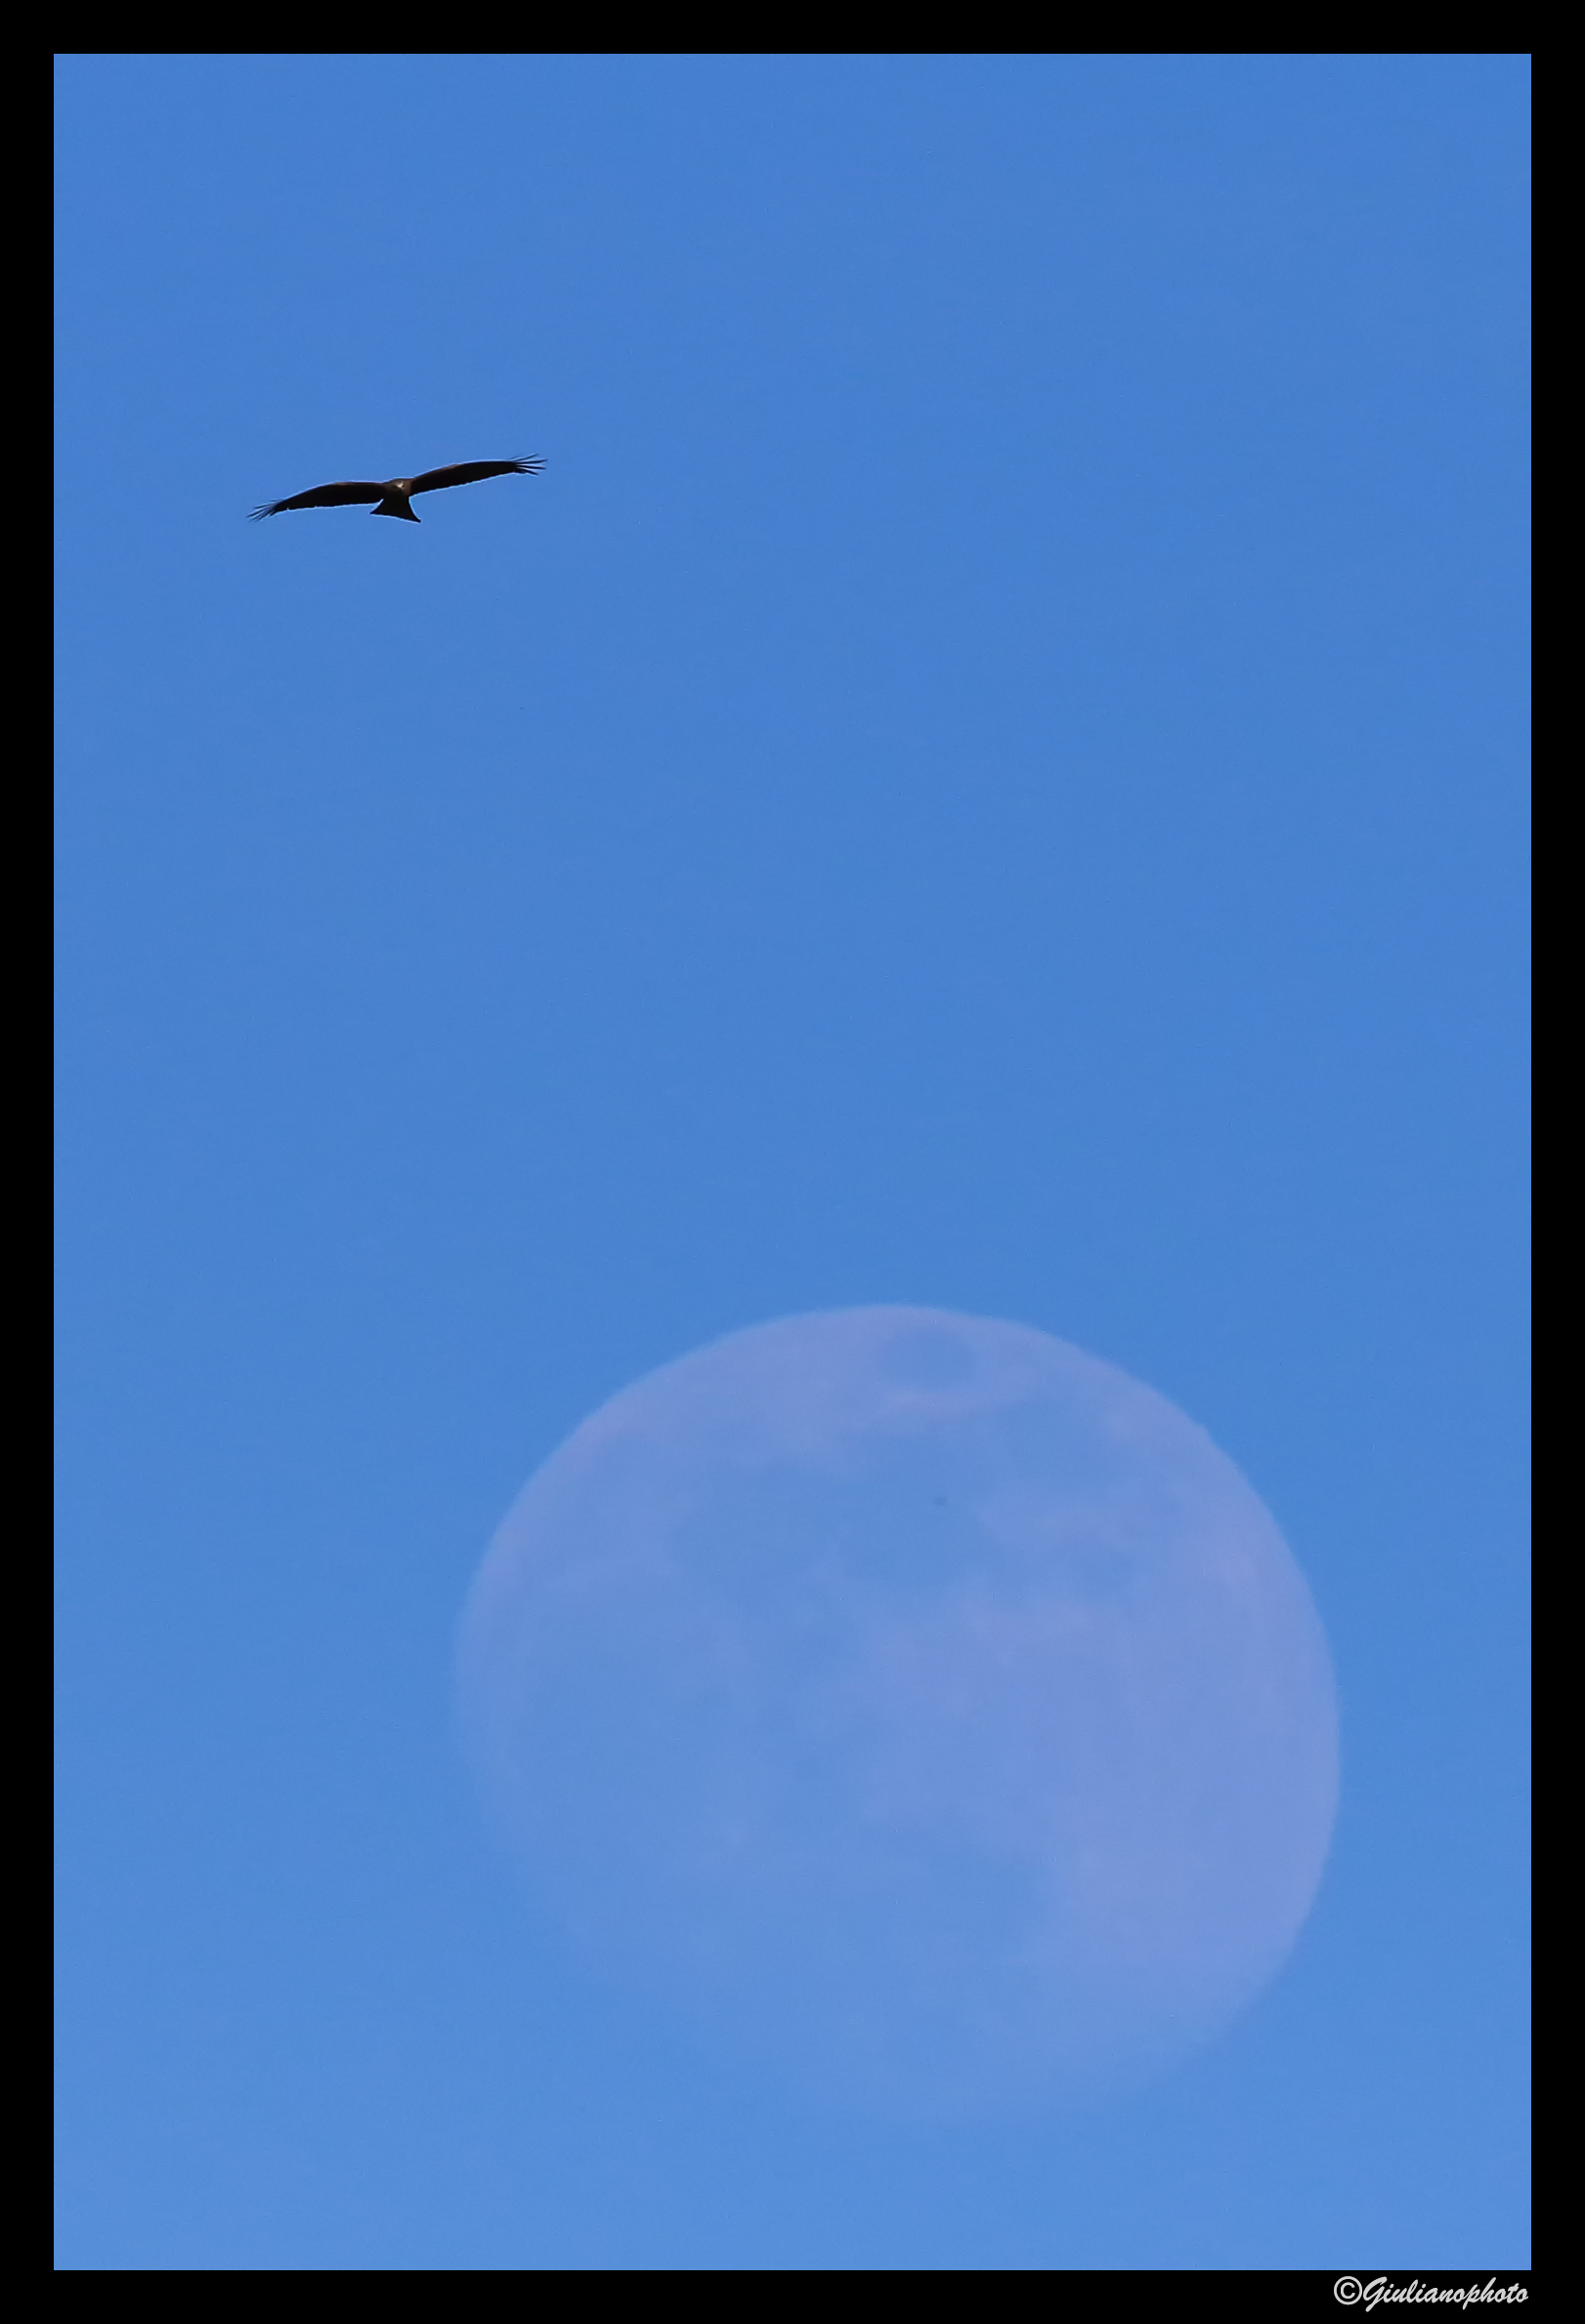 The Kite and the moon...